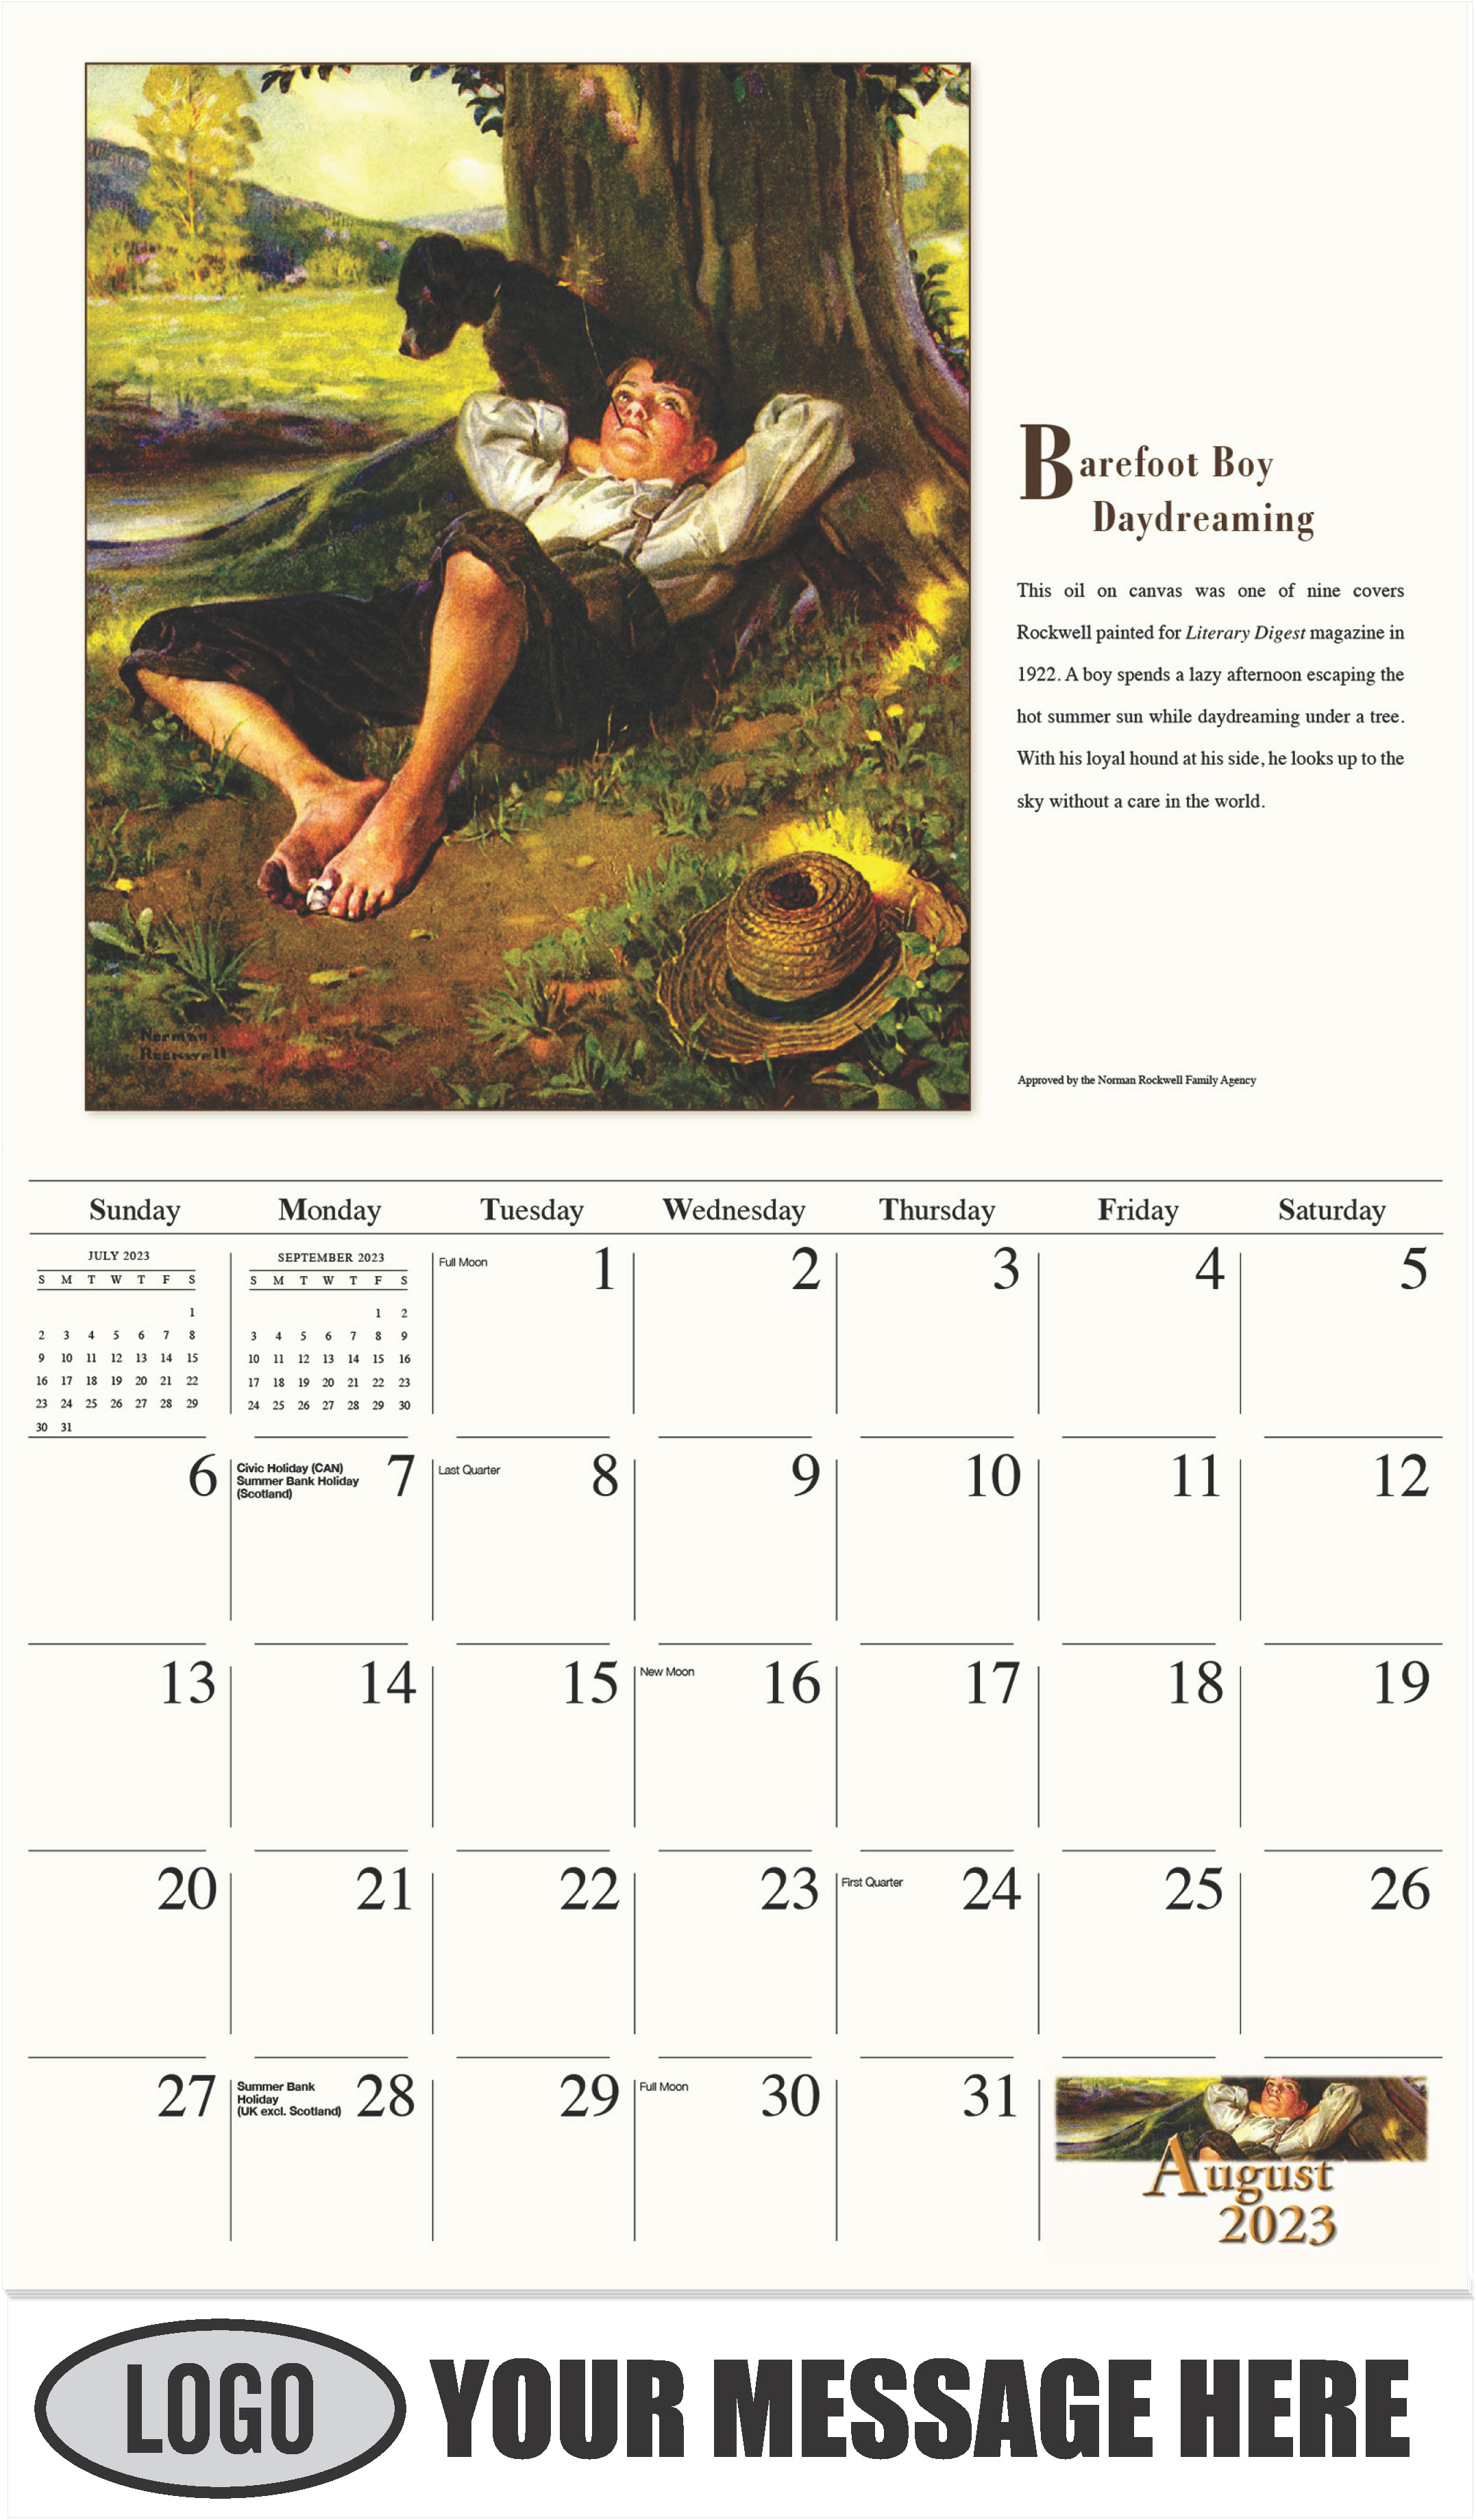 Barefoot Boy Daydreaming - August - Norman Rockwell - Memorable Images 2023 Promotional Calendar